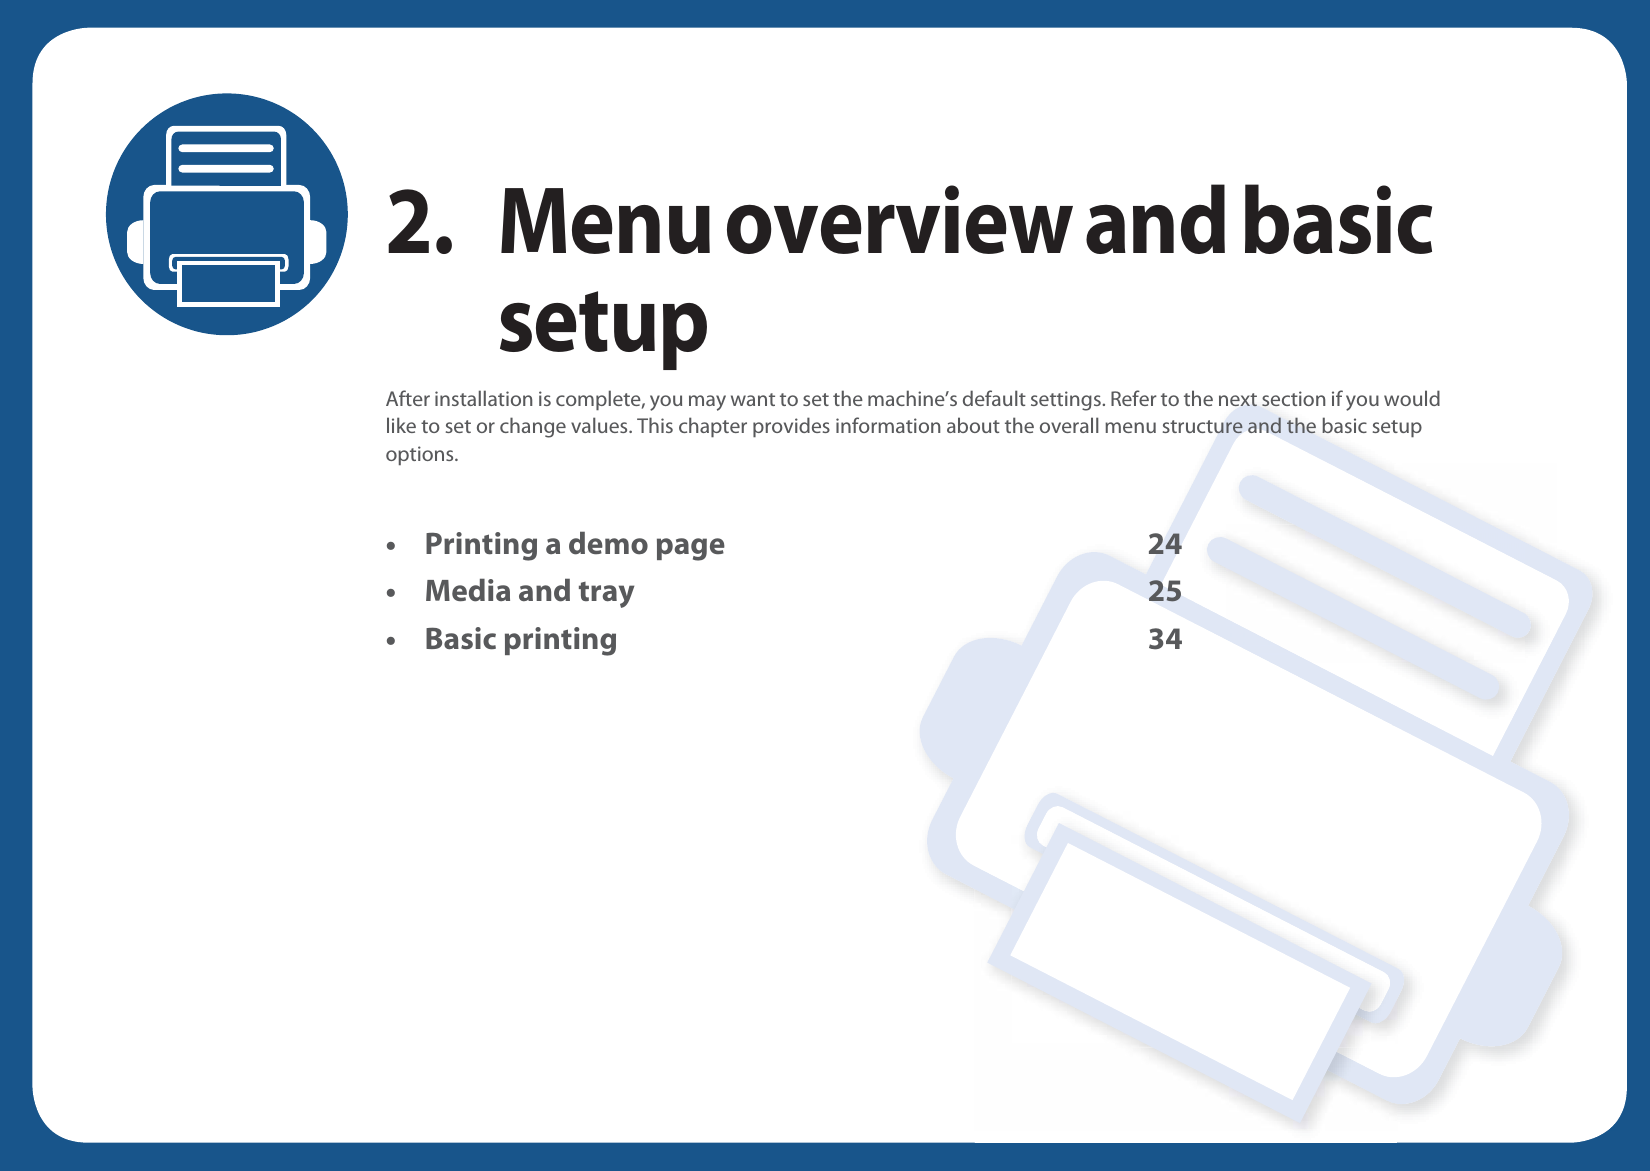 2. Menu overview and basic setupAfter installation is complete, you may want to set the machine’s default settings. Refer to the next section if you would like to set or change values. This chapter provides information about the overall menu structure and the basic setup options.• Printing a demo page 24• Media and tray 25• Basic printing 34